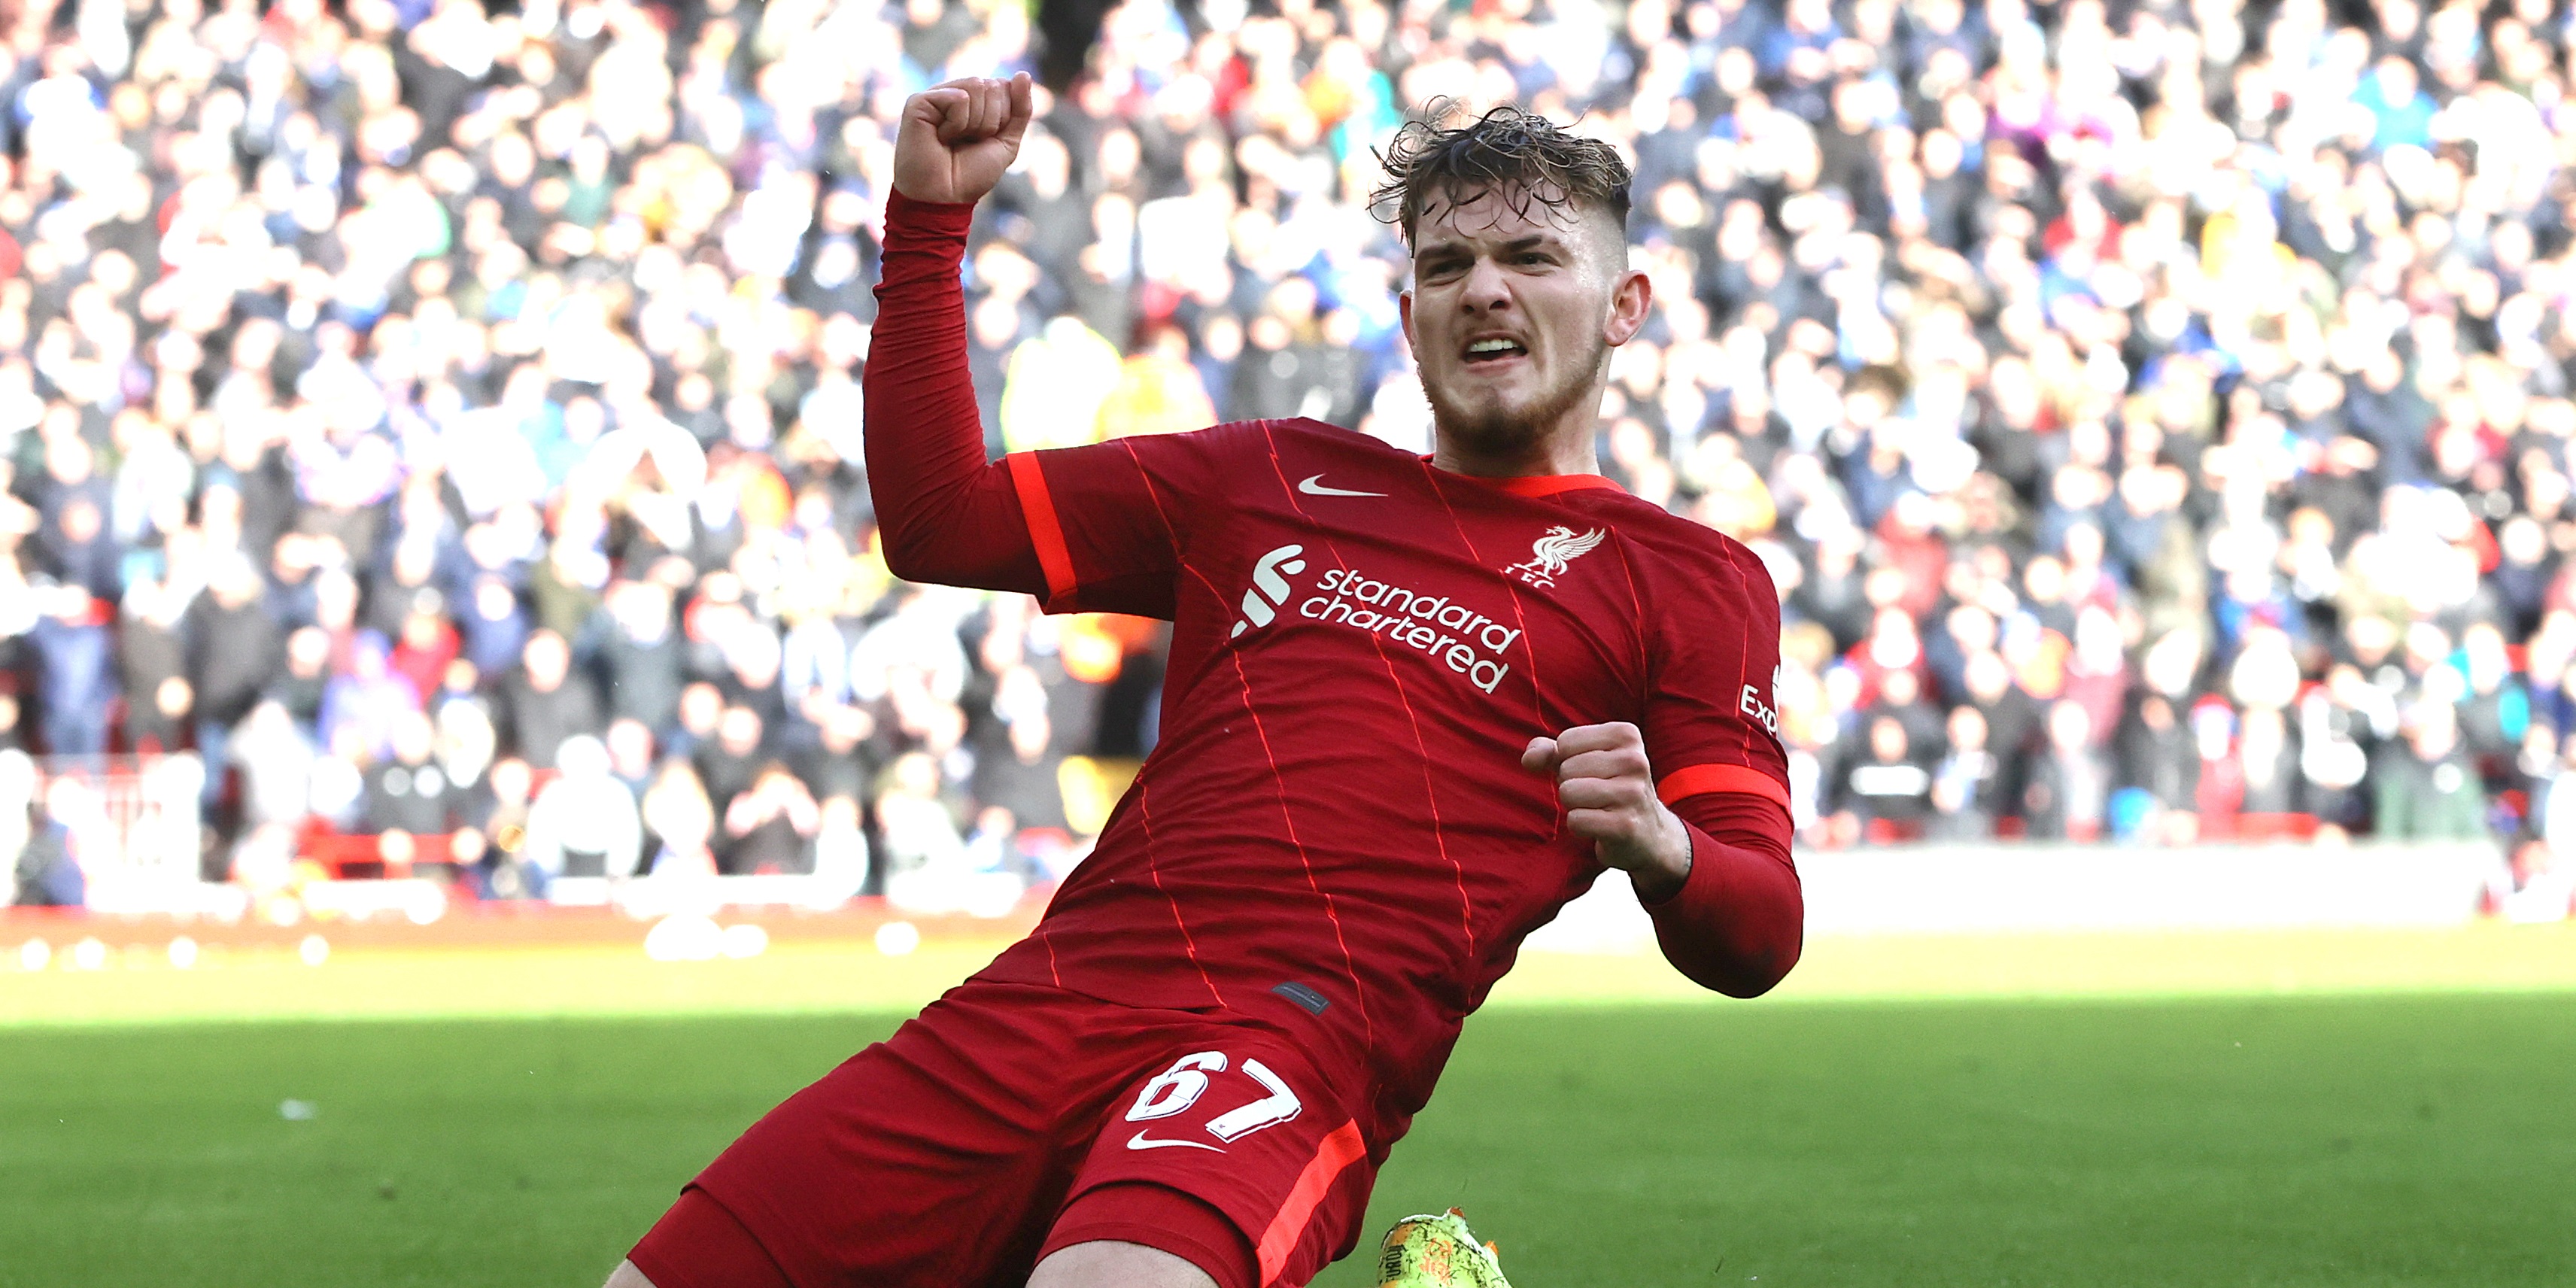 Elliott names two Liverpool stars that are a ‘dream for any youngster’ to play with